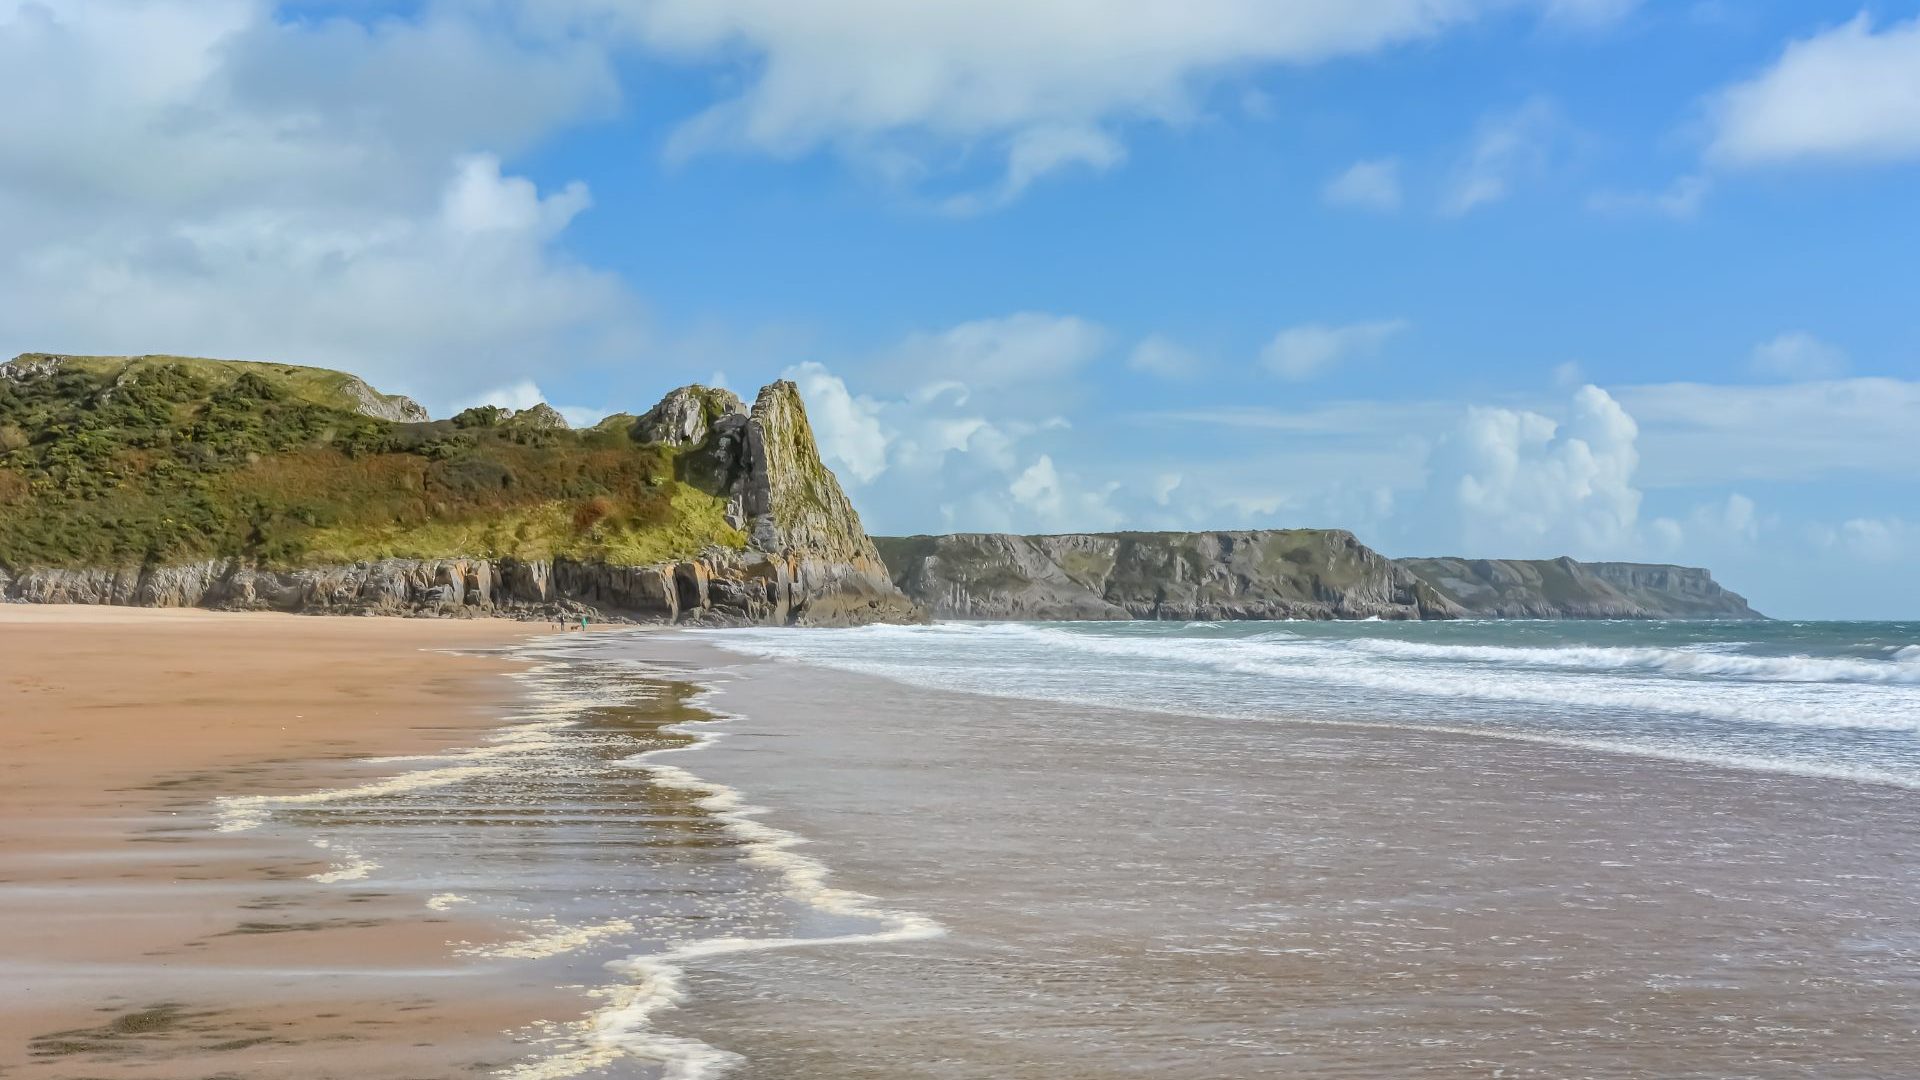 Sands and cliffs at the Eastern End Of Oxwich Bay Beach On The Gower Peninsula In Wales